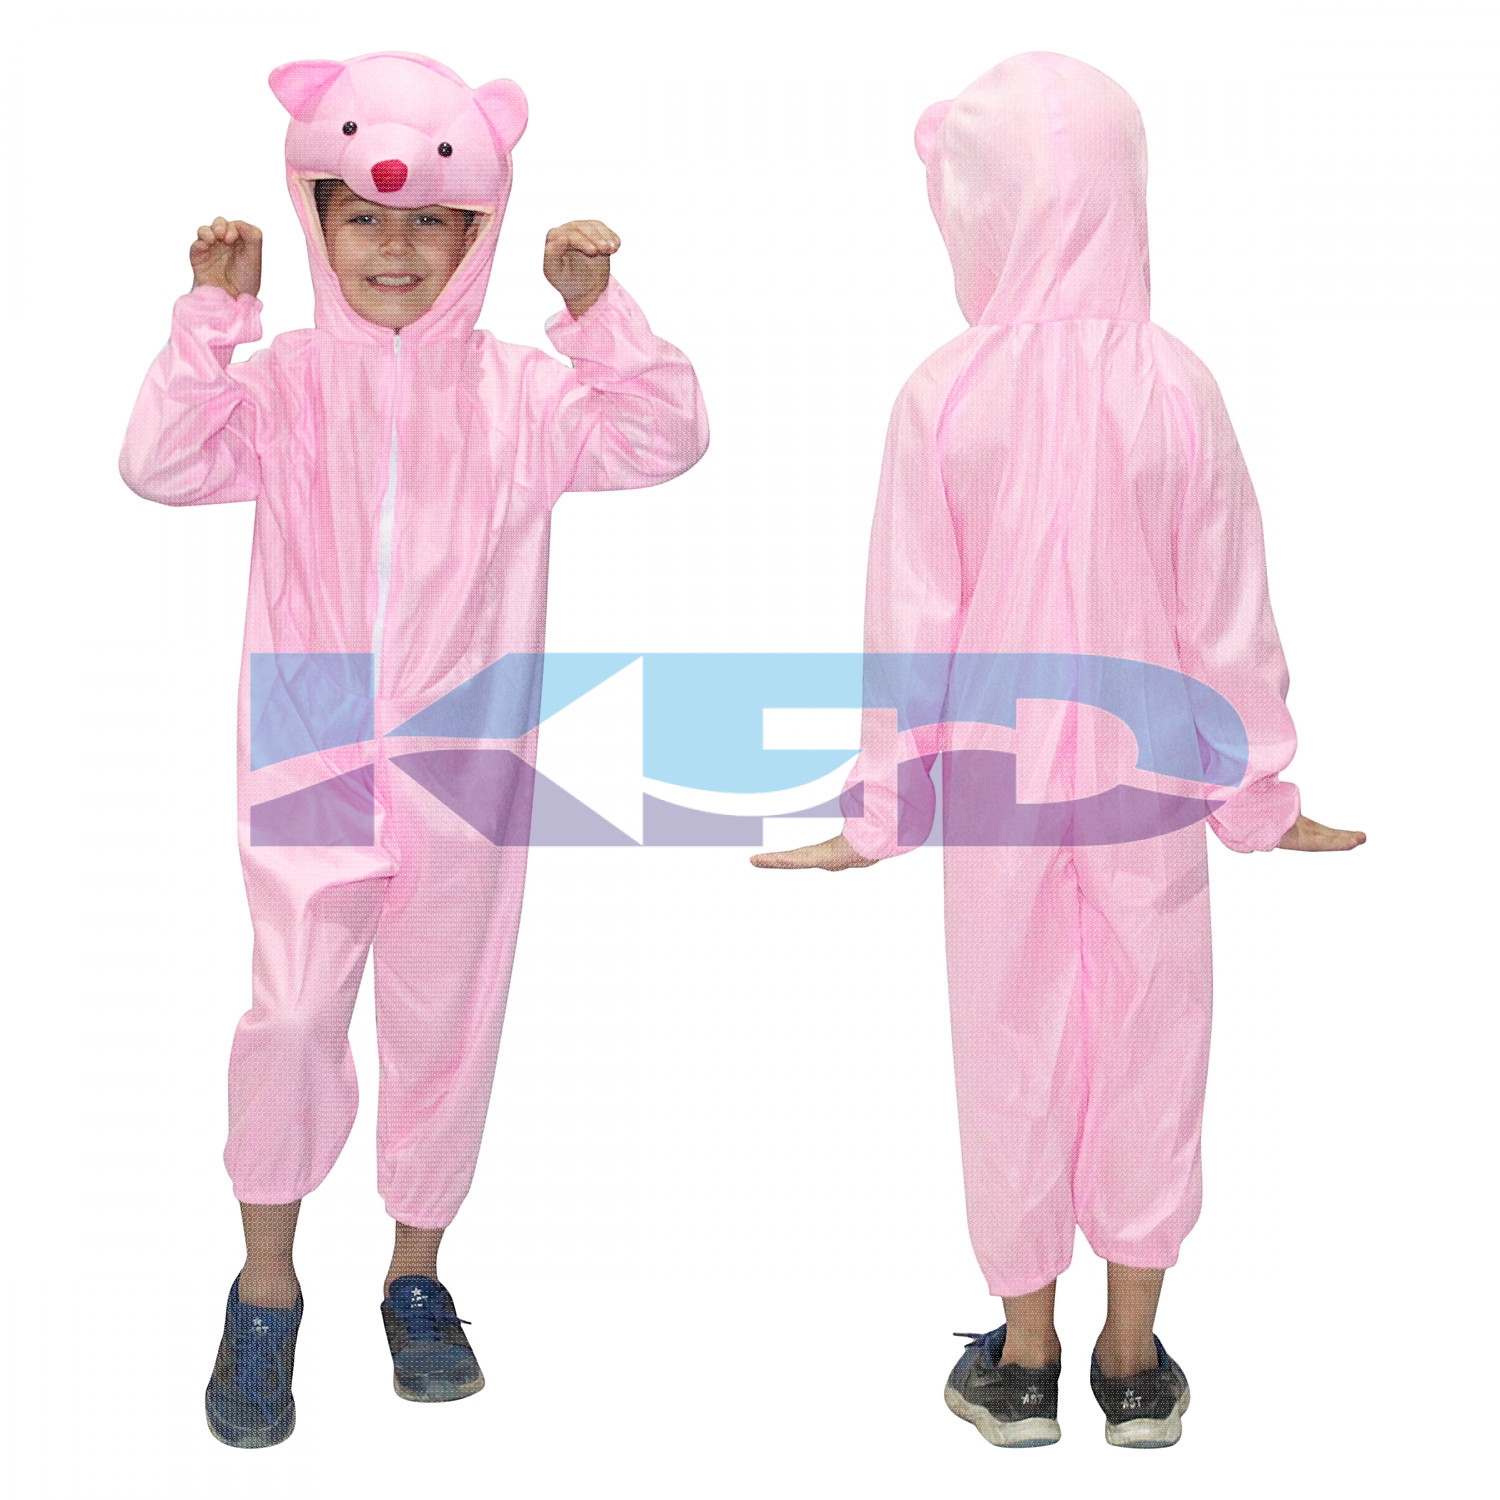 Teddy bear Fancy dress for kids,Cartoon Costume for Annual function/Theme Party/Stage Shows/Competition/Birthday Party Dress